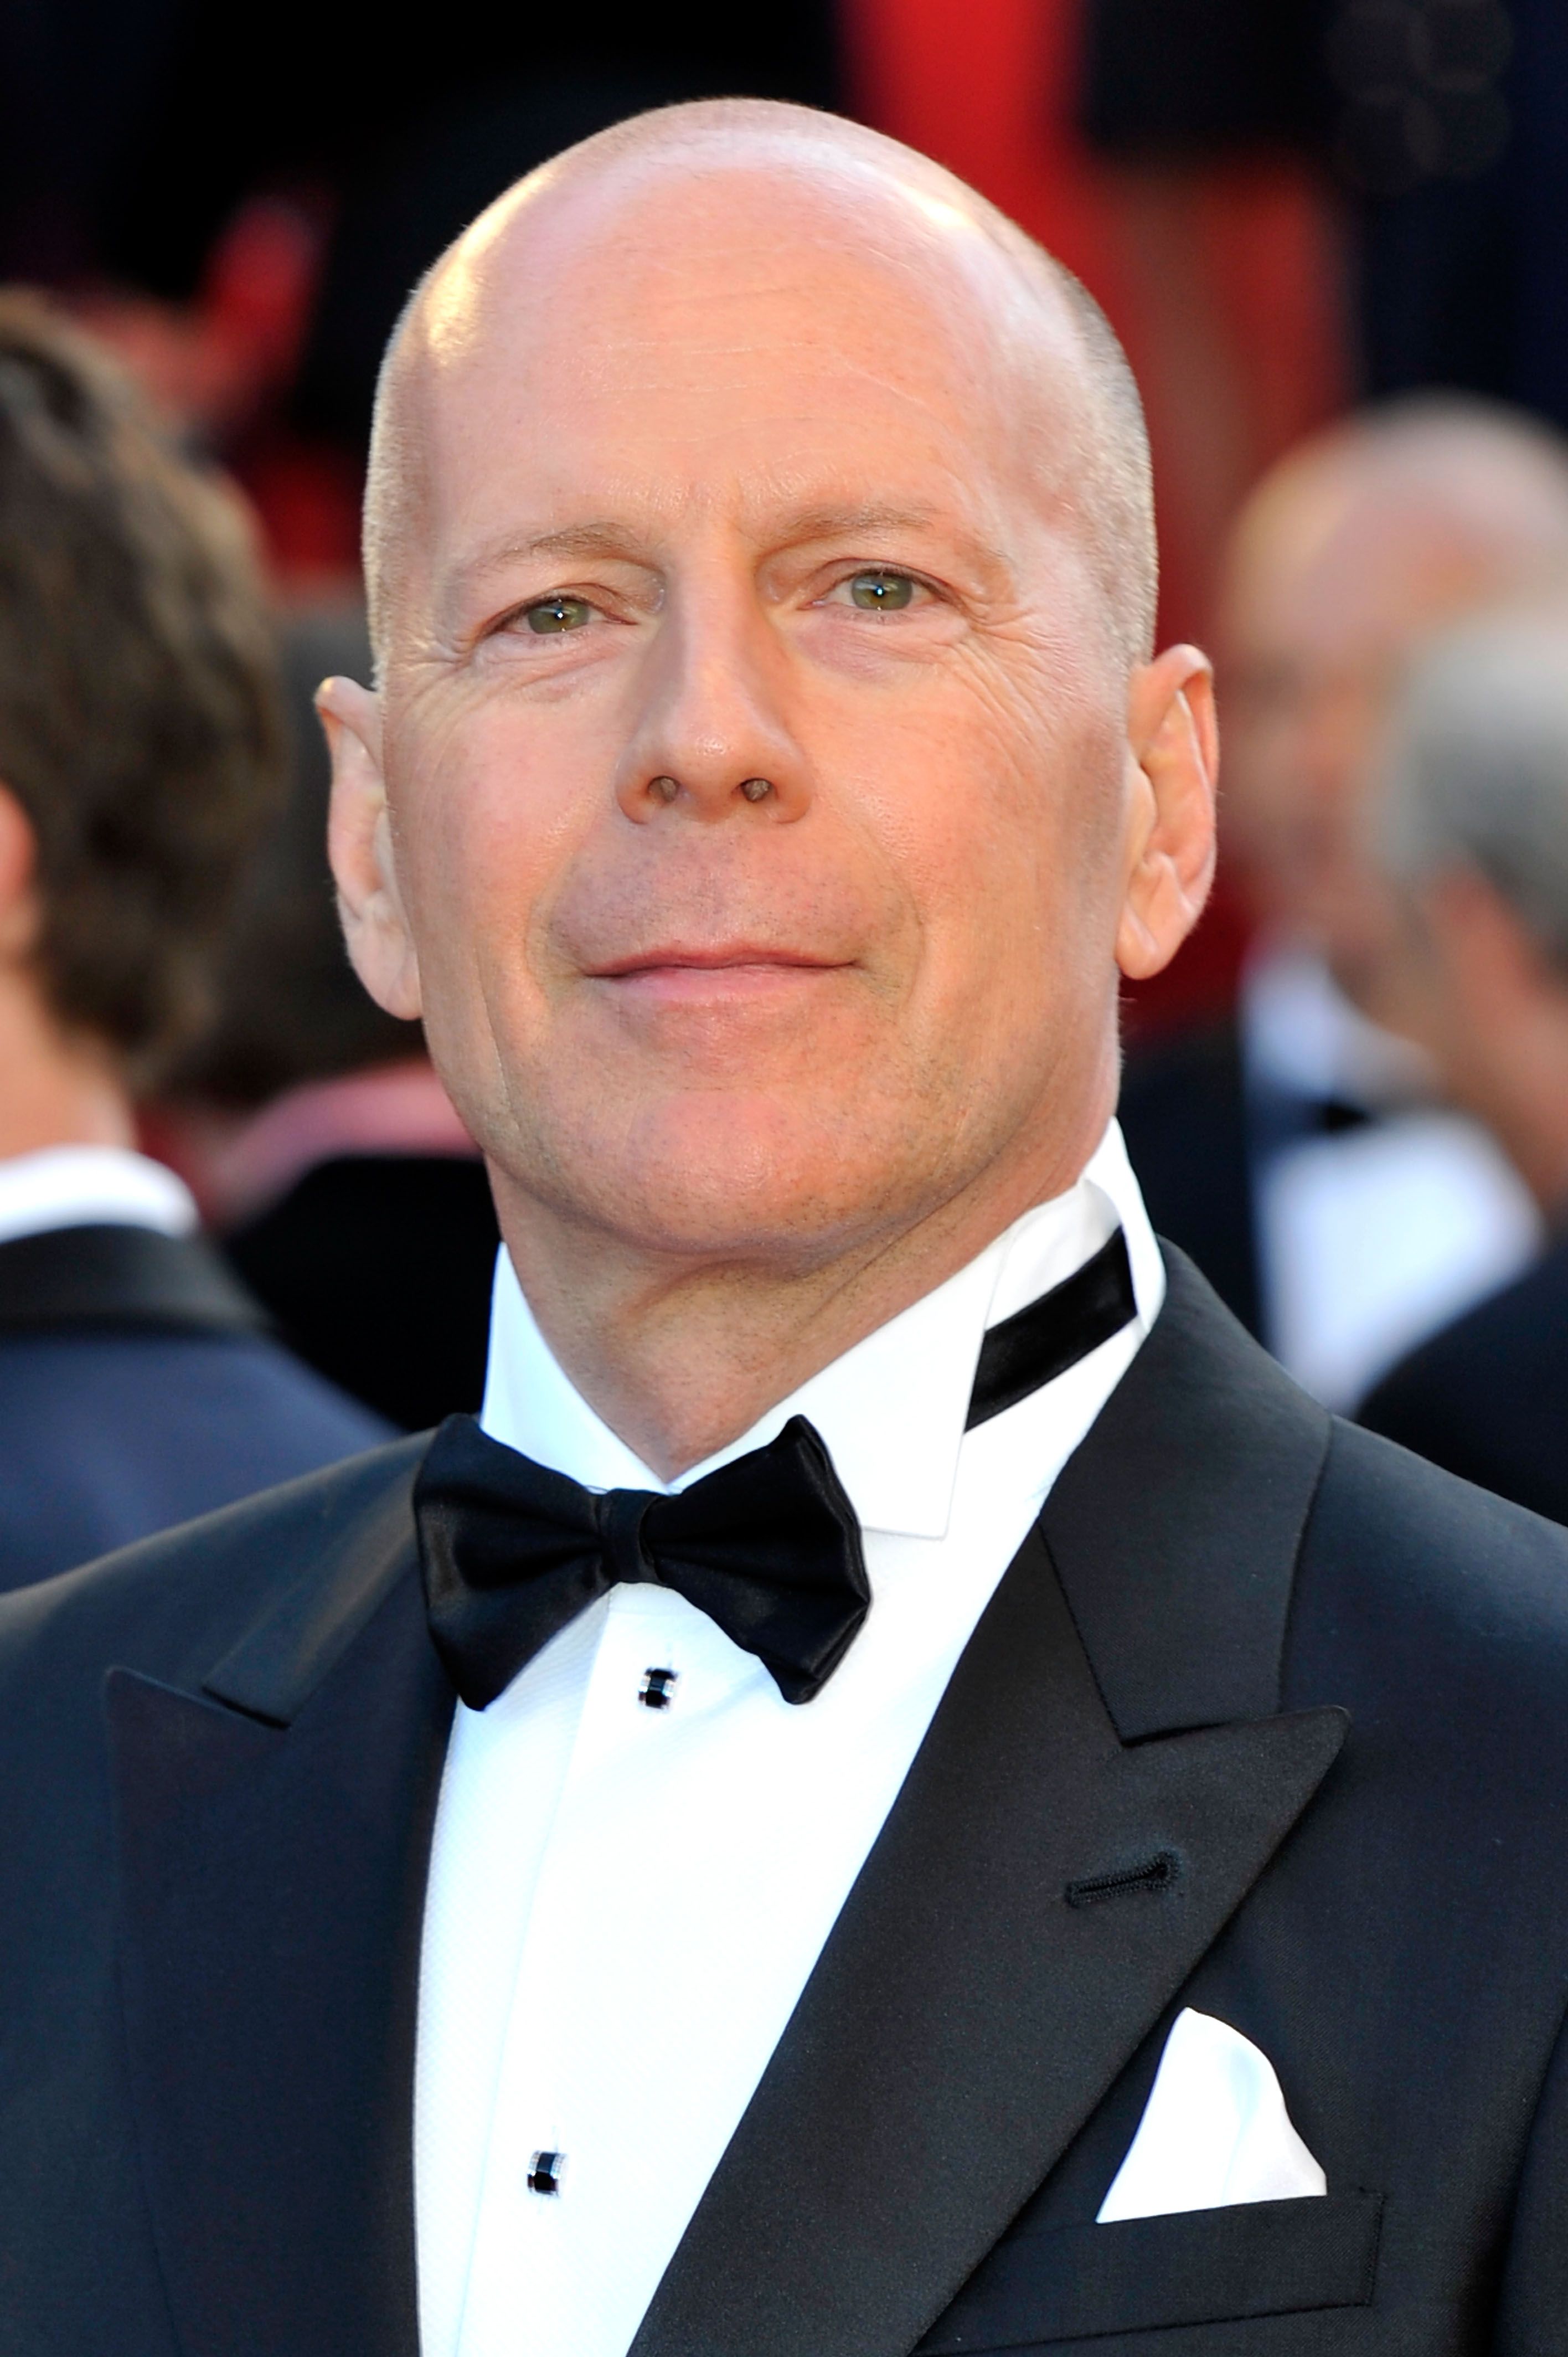 Pictures of Bruce Willis